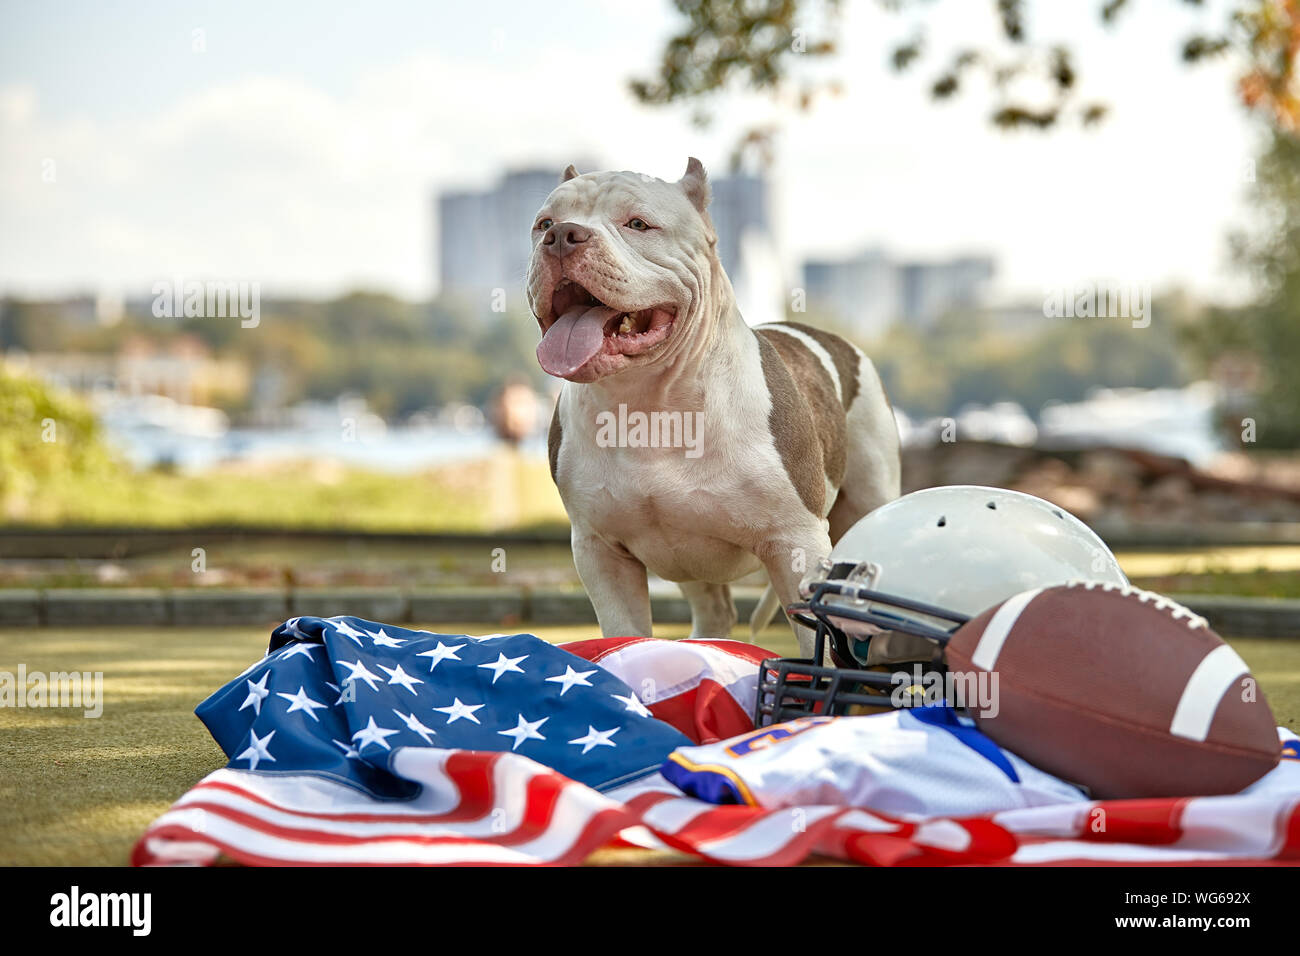 Premium Photo  American football player with a dog posing on